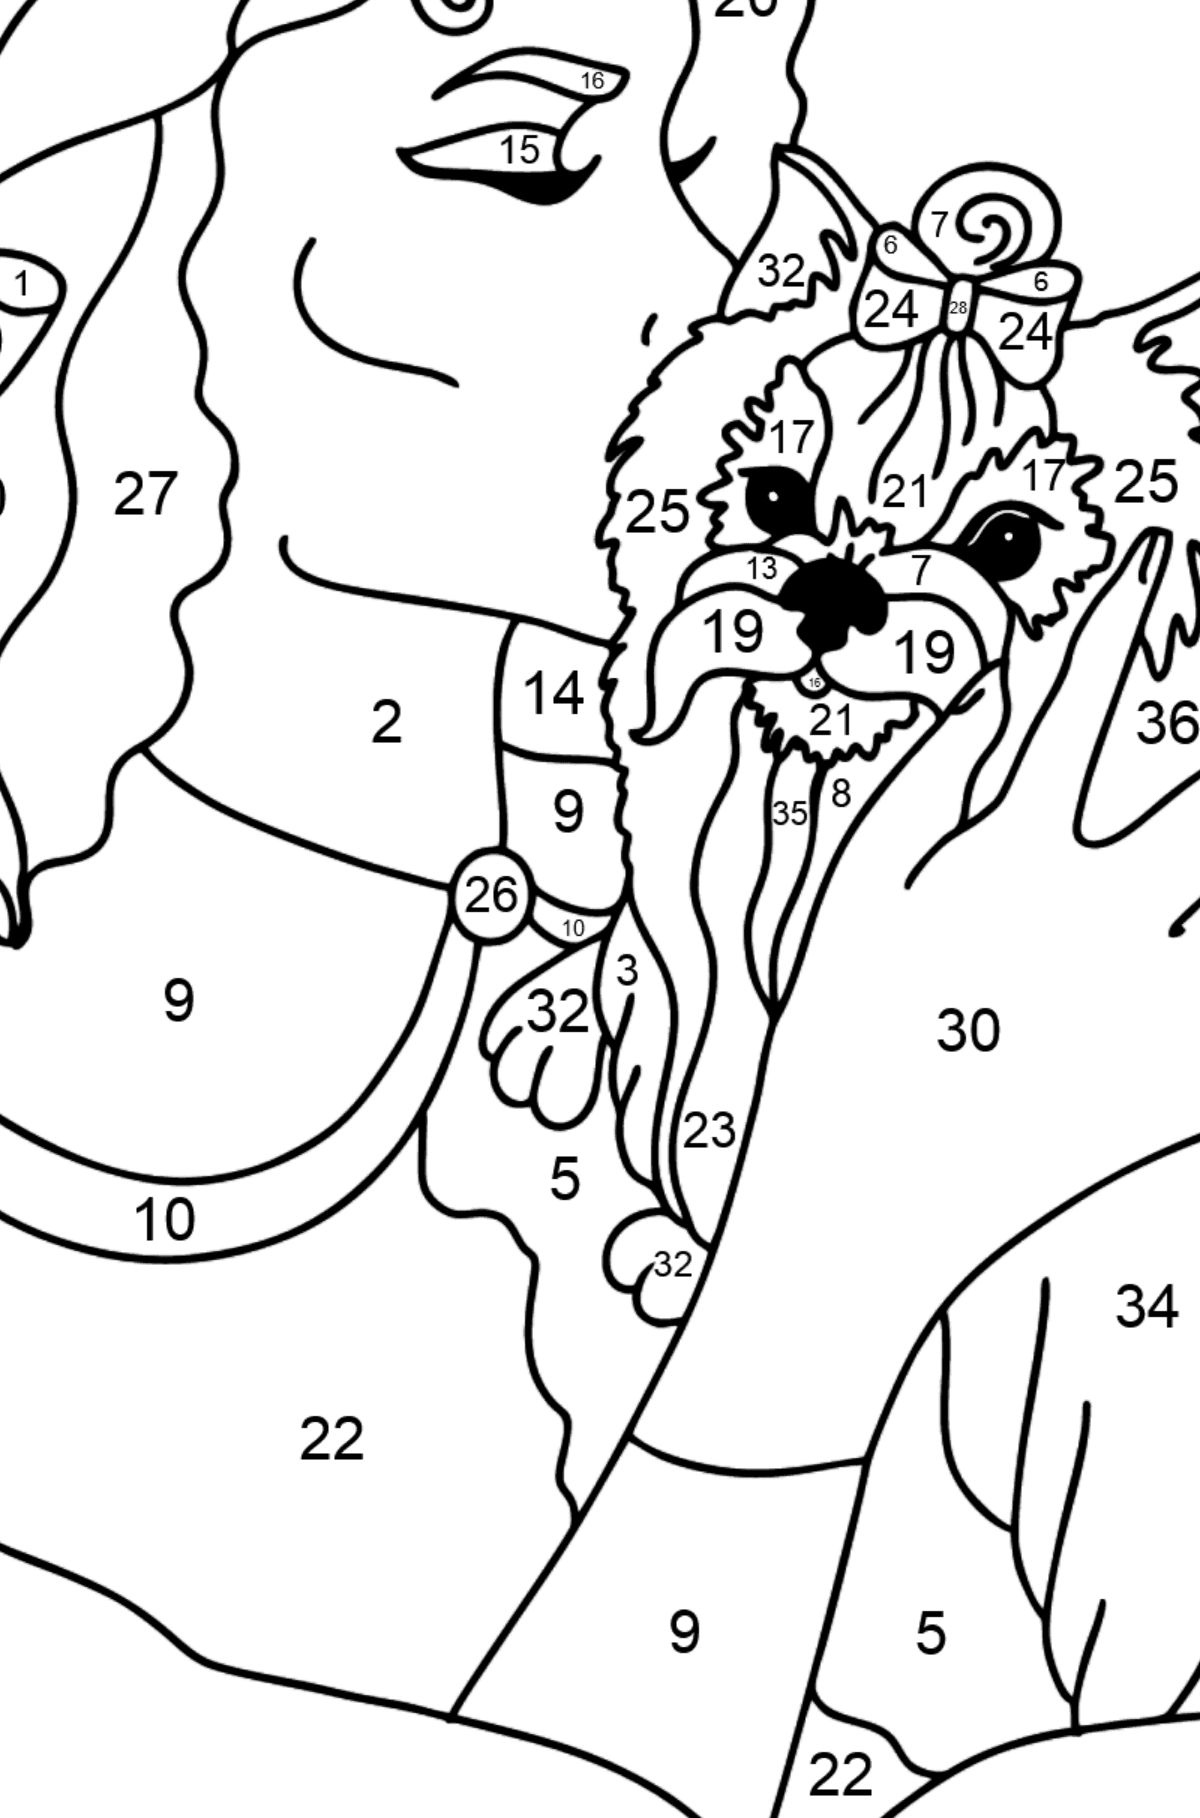 Yorkshire Terrier with Owner coloring page - Coloring by Numbers for Kids